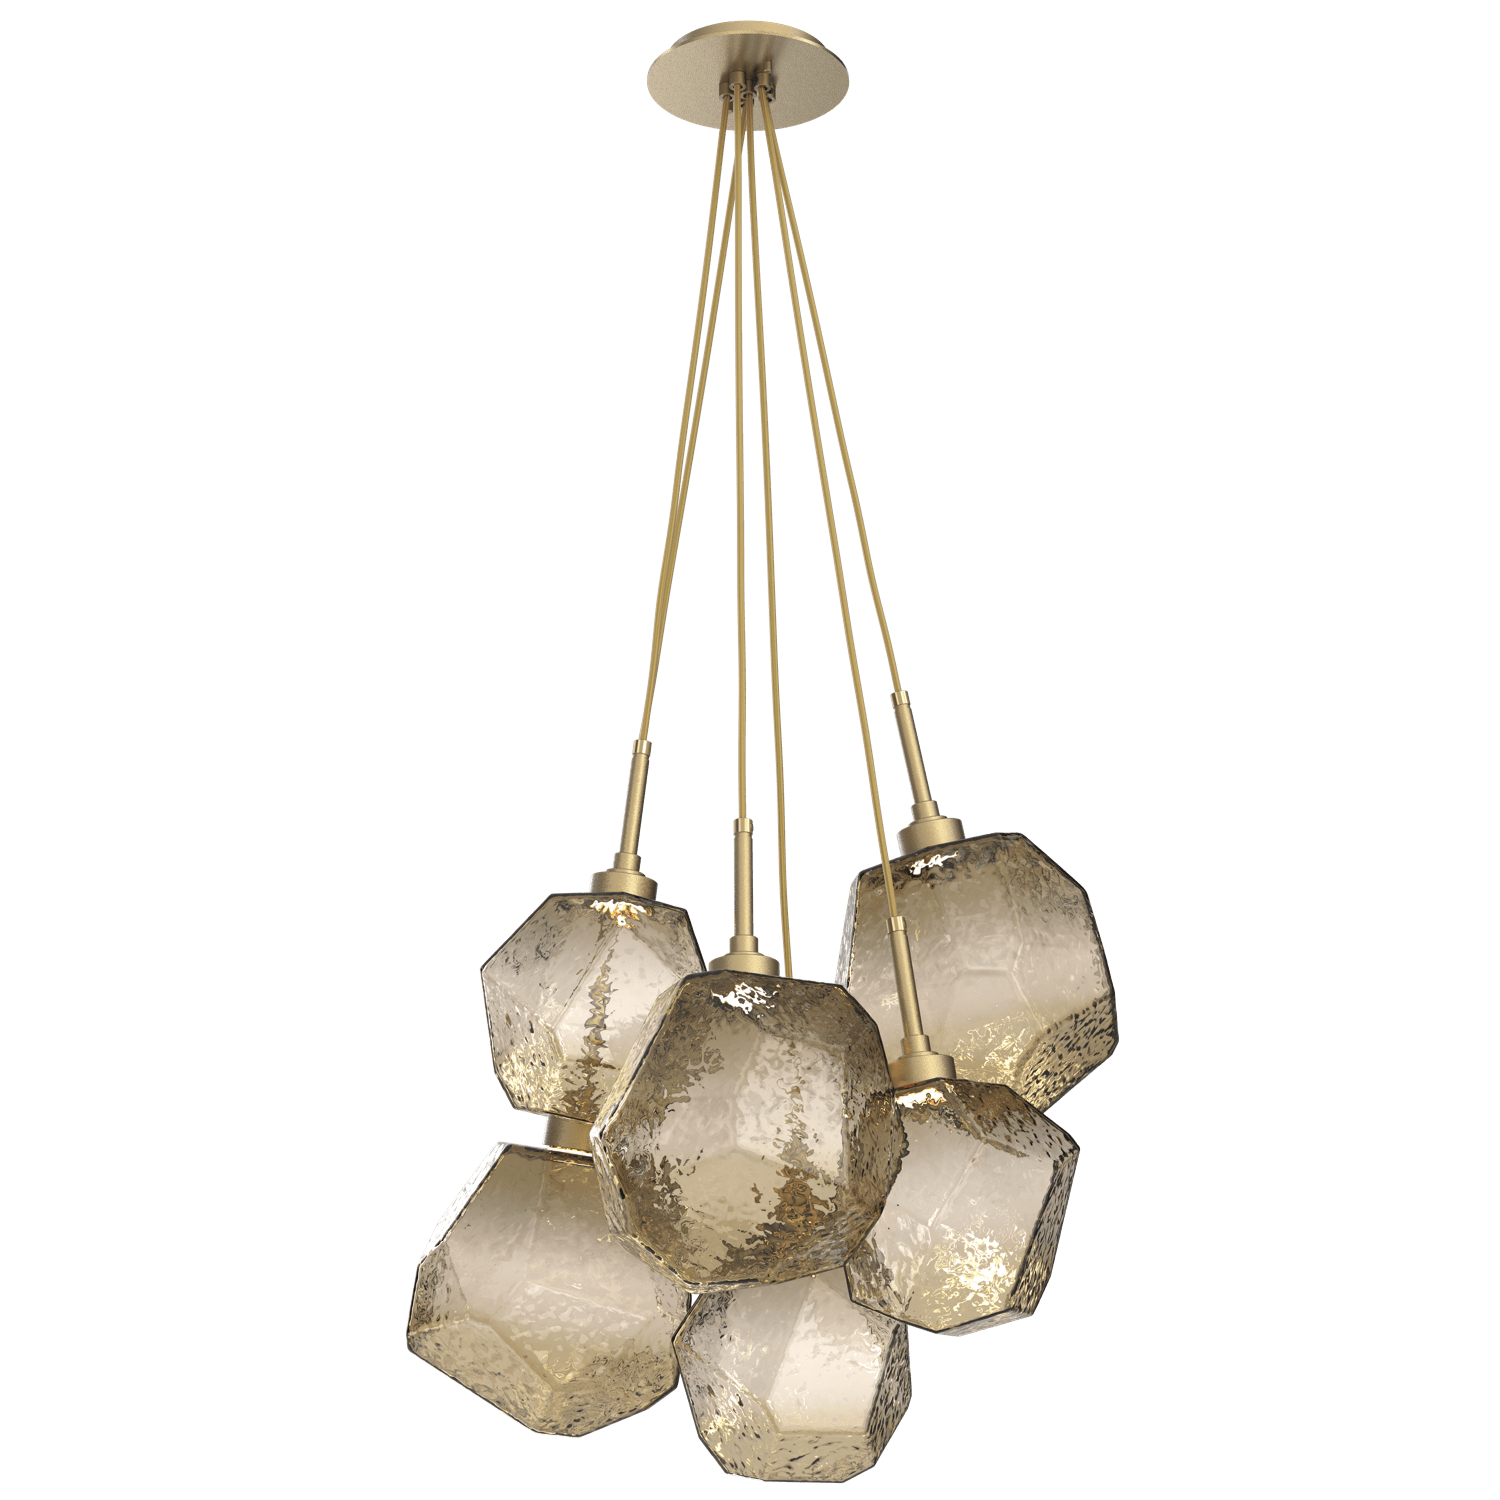 CHB0039-0F-GB-B-Hammerton-Studio-Gem-6-light-cluster-pendant-light-with-gilded-brass-finish-and-bronze-blown-glass-shades-and-LED-lamping